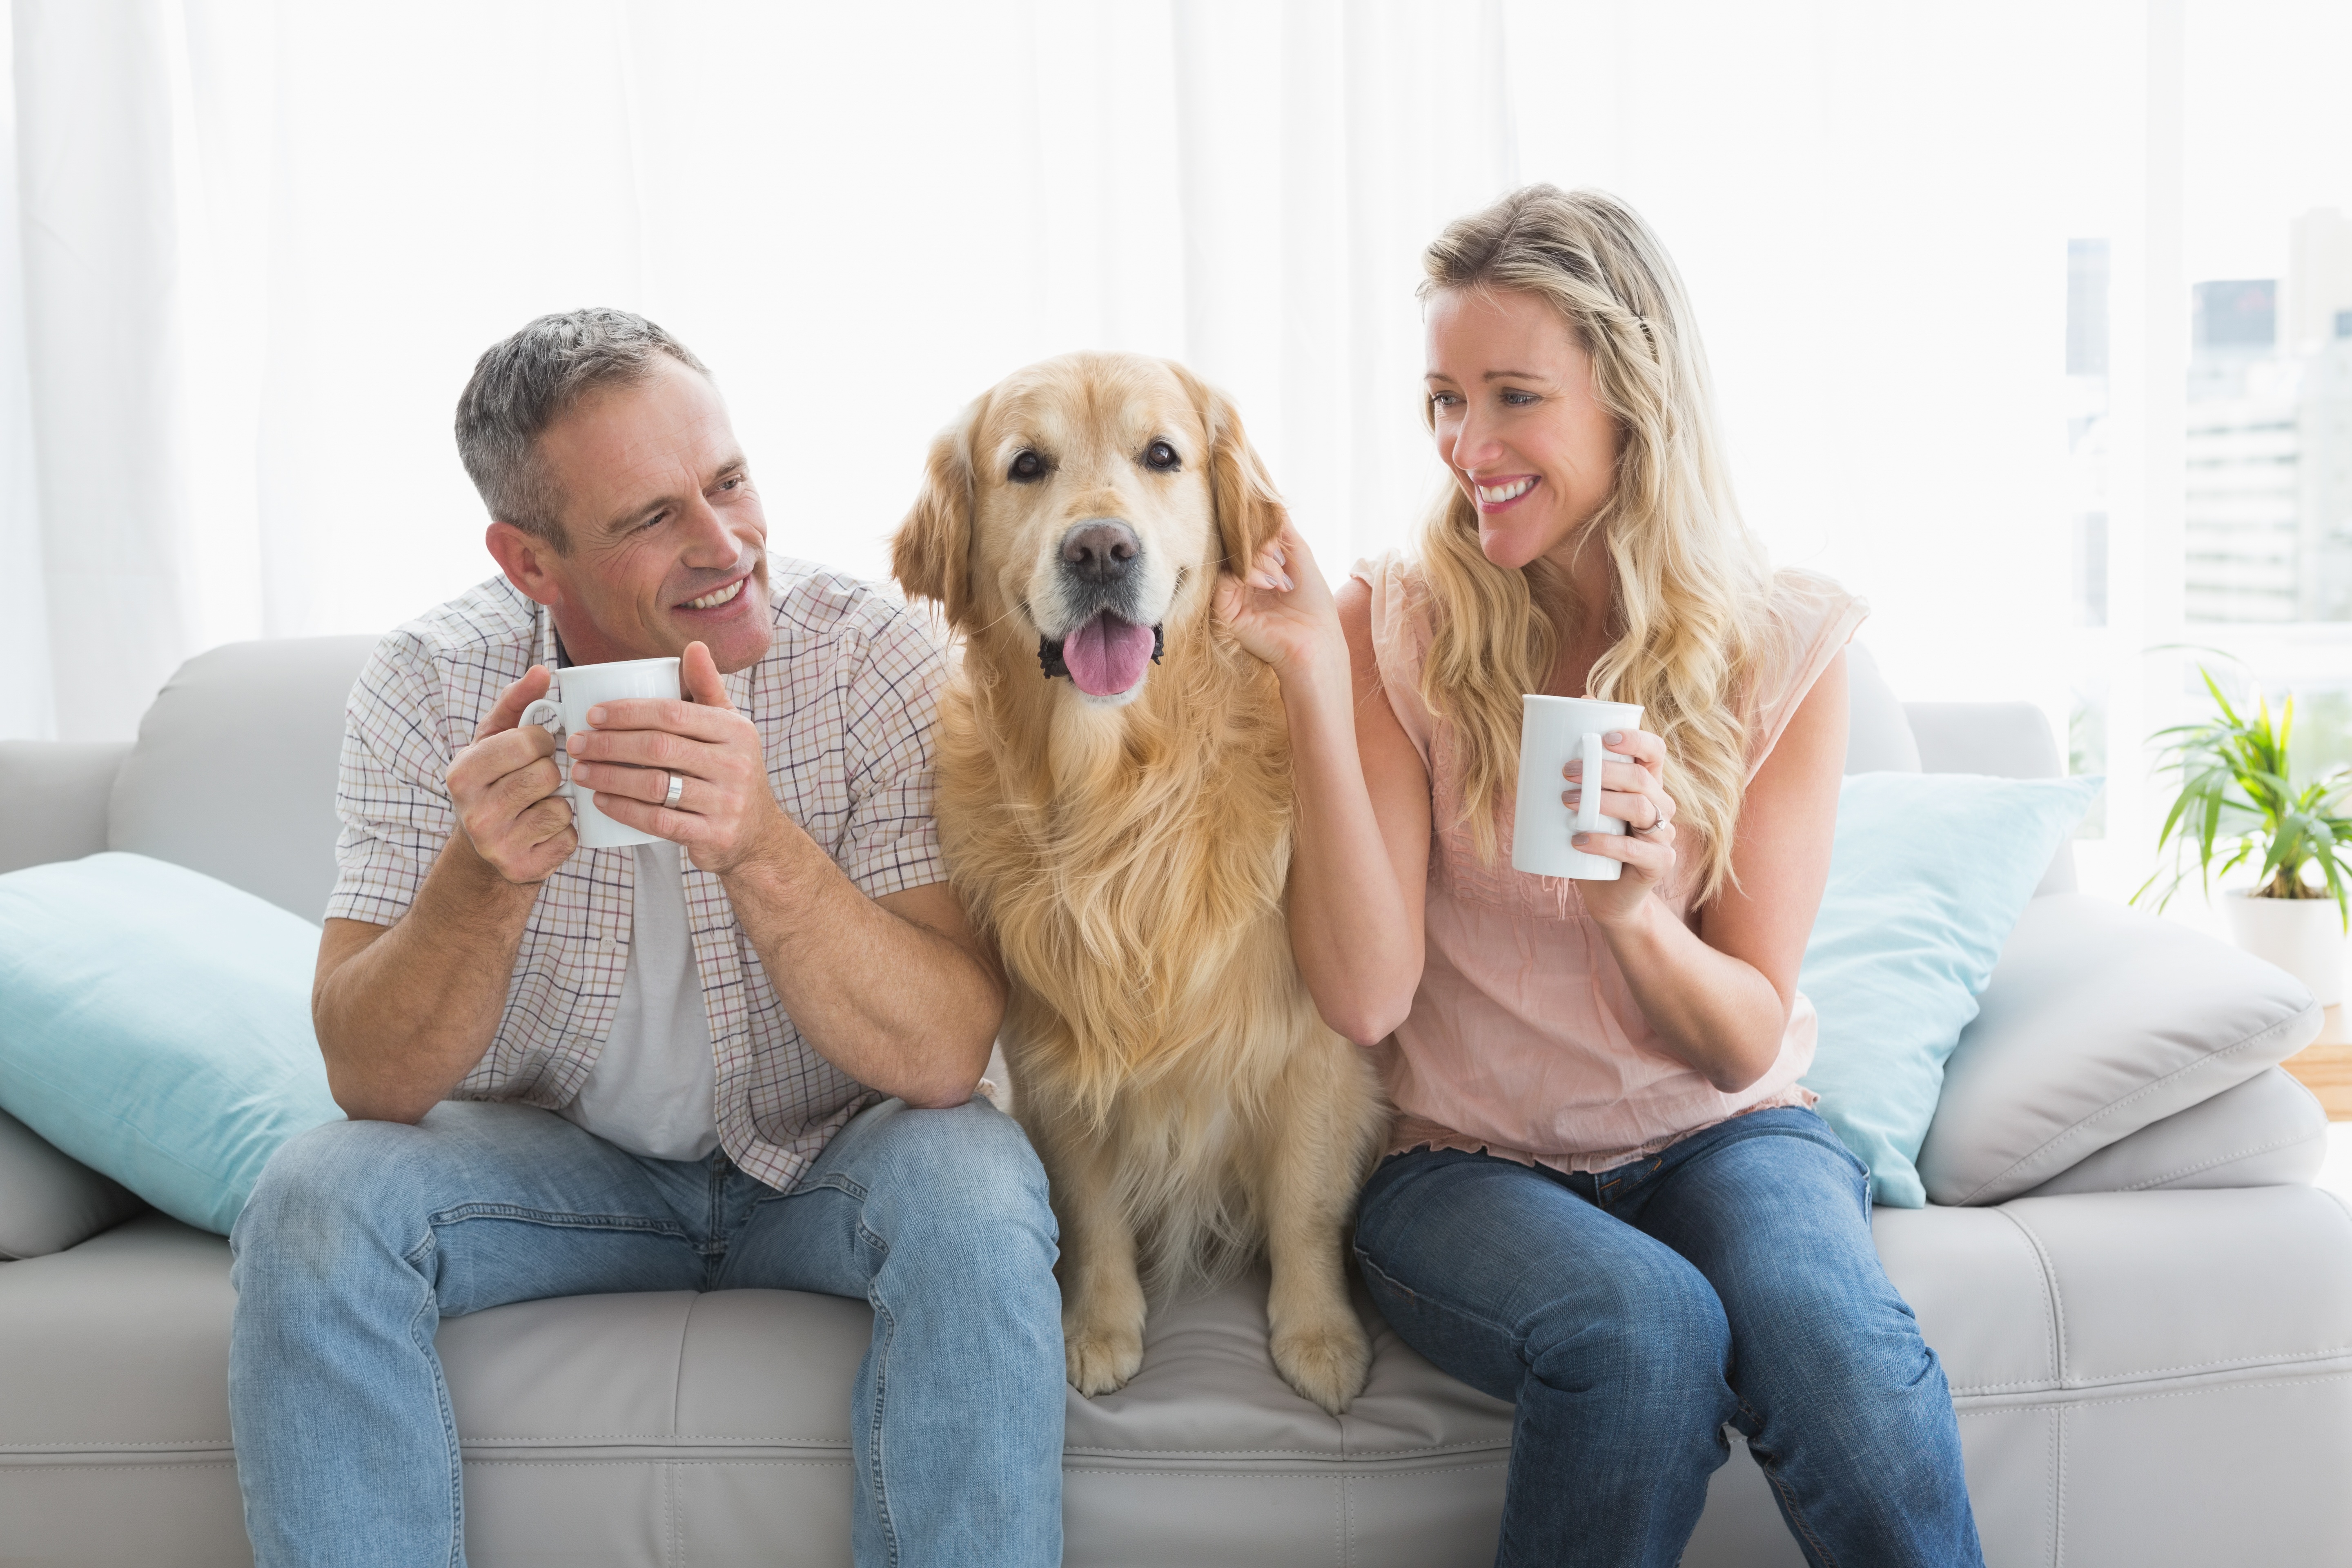 Allowing pets will boost interest in your property and open up the opportunity for a more long-term let